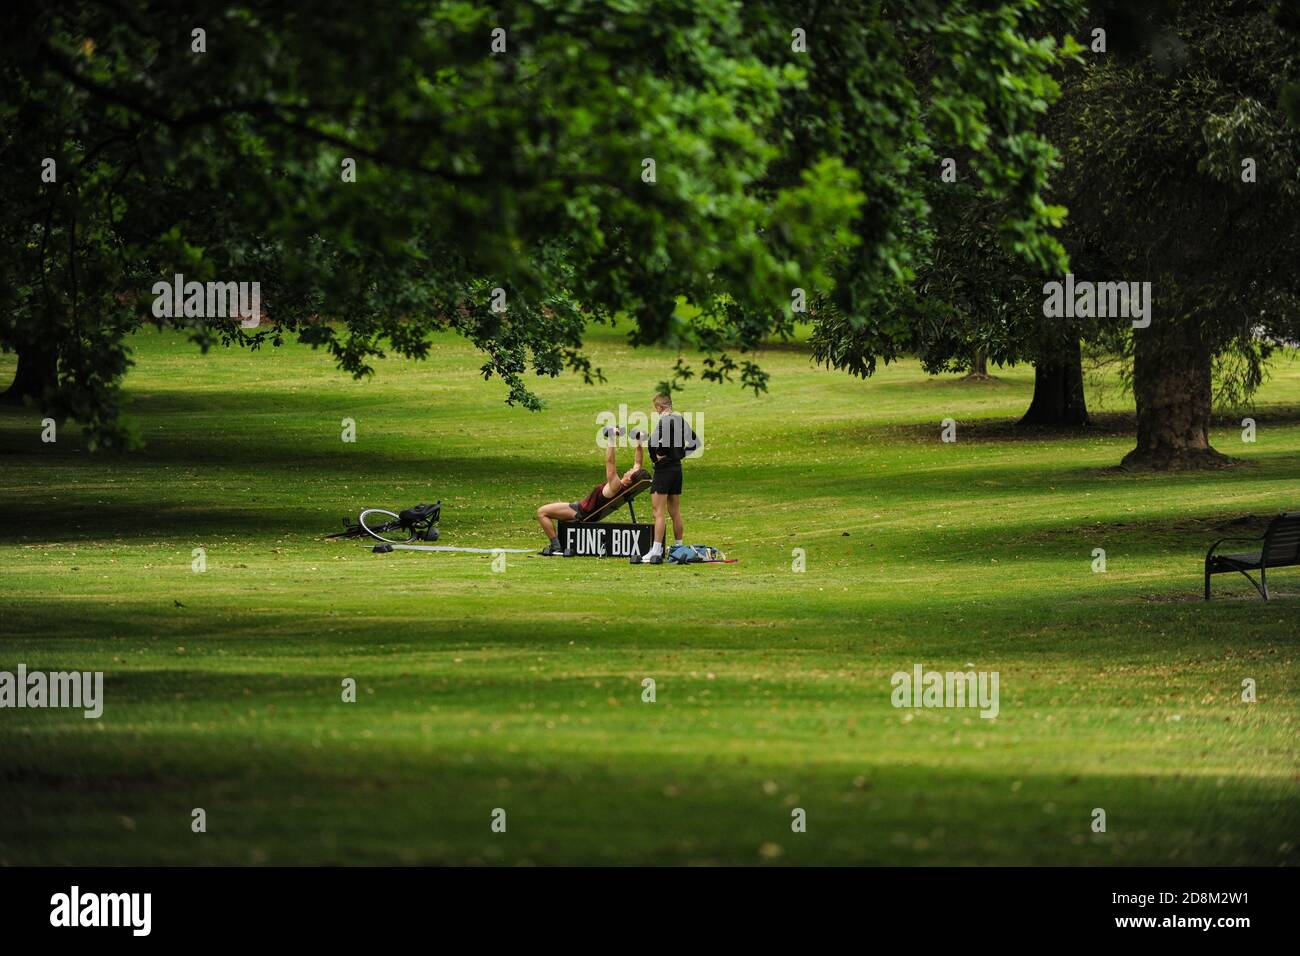 Melbourne, Australia 31 Oct 2020, a lone trainer and client workout in Treasury Gardens unaware of preparations underway for a major police action to control an anti-government protest planned for the park. Credit: Michael Currie/Alamy Live News Stock Photo